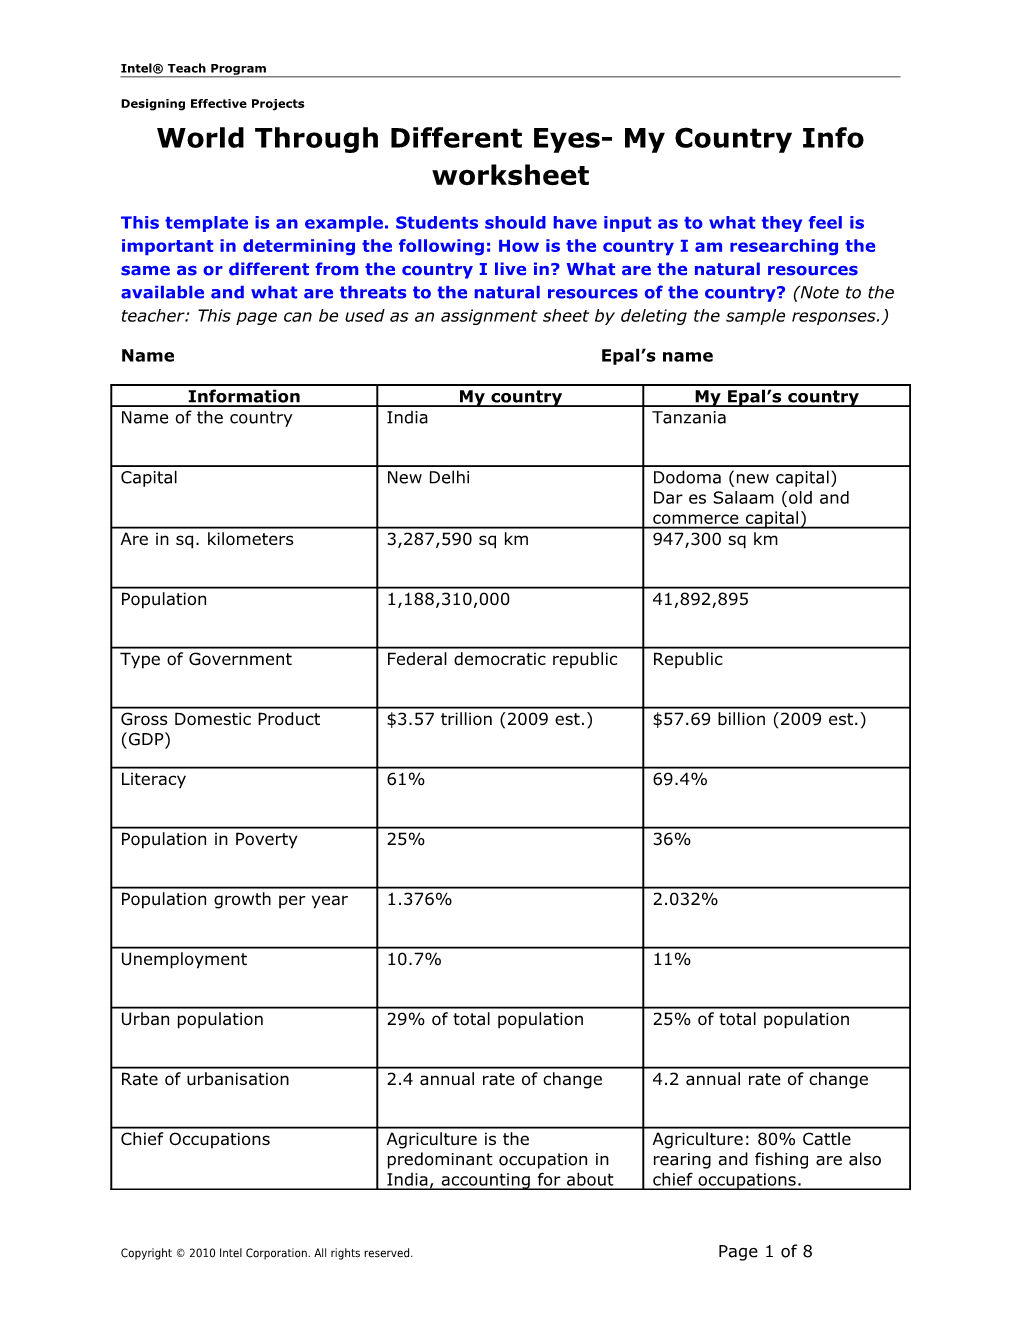 World Through Different Eyes- My Country Info Worksheet